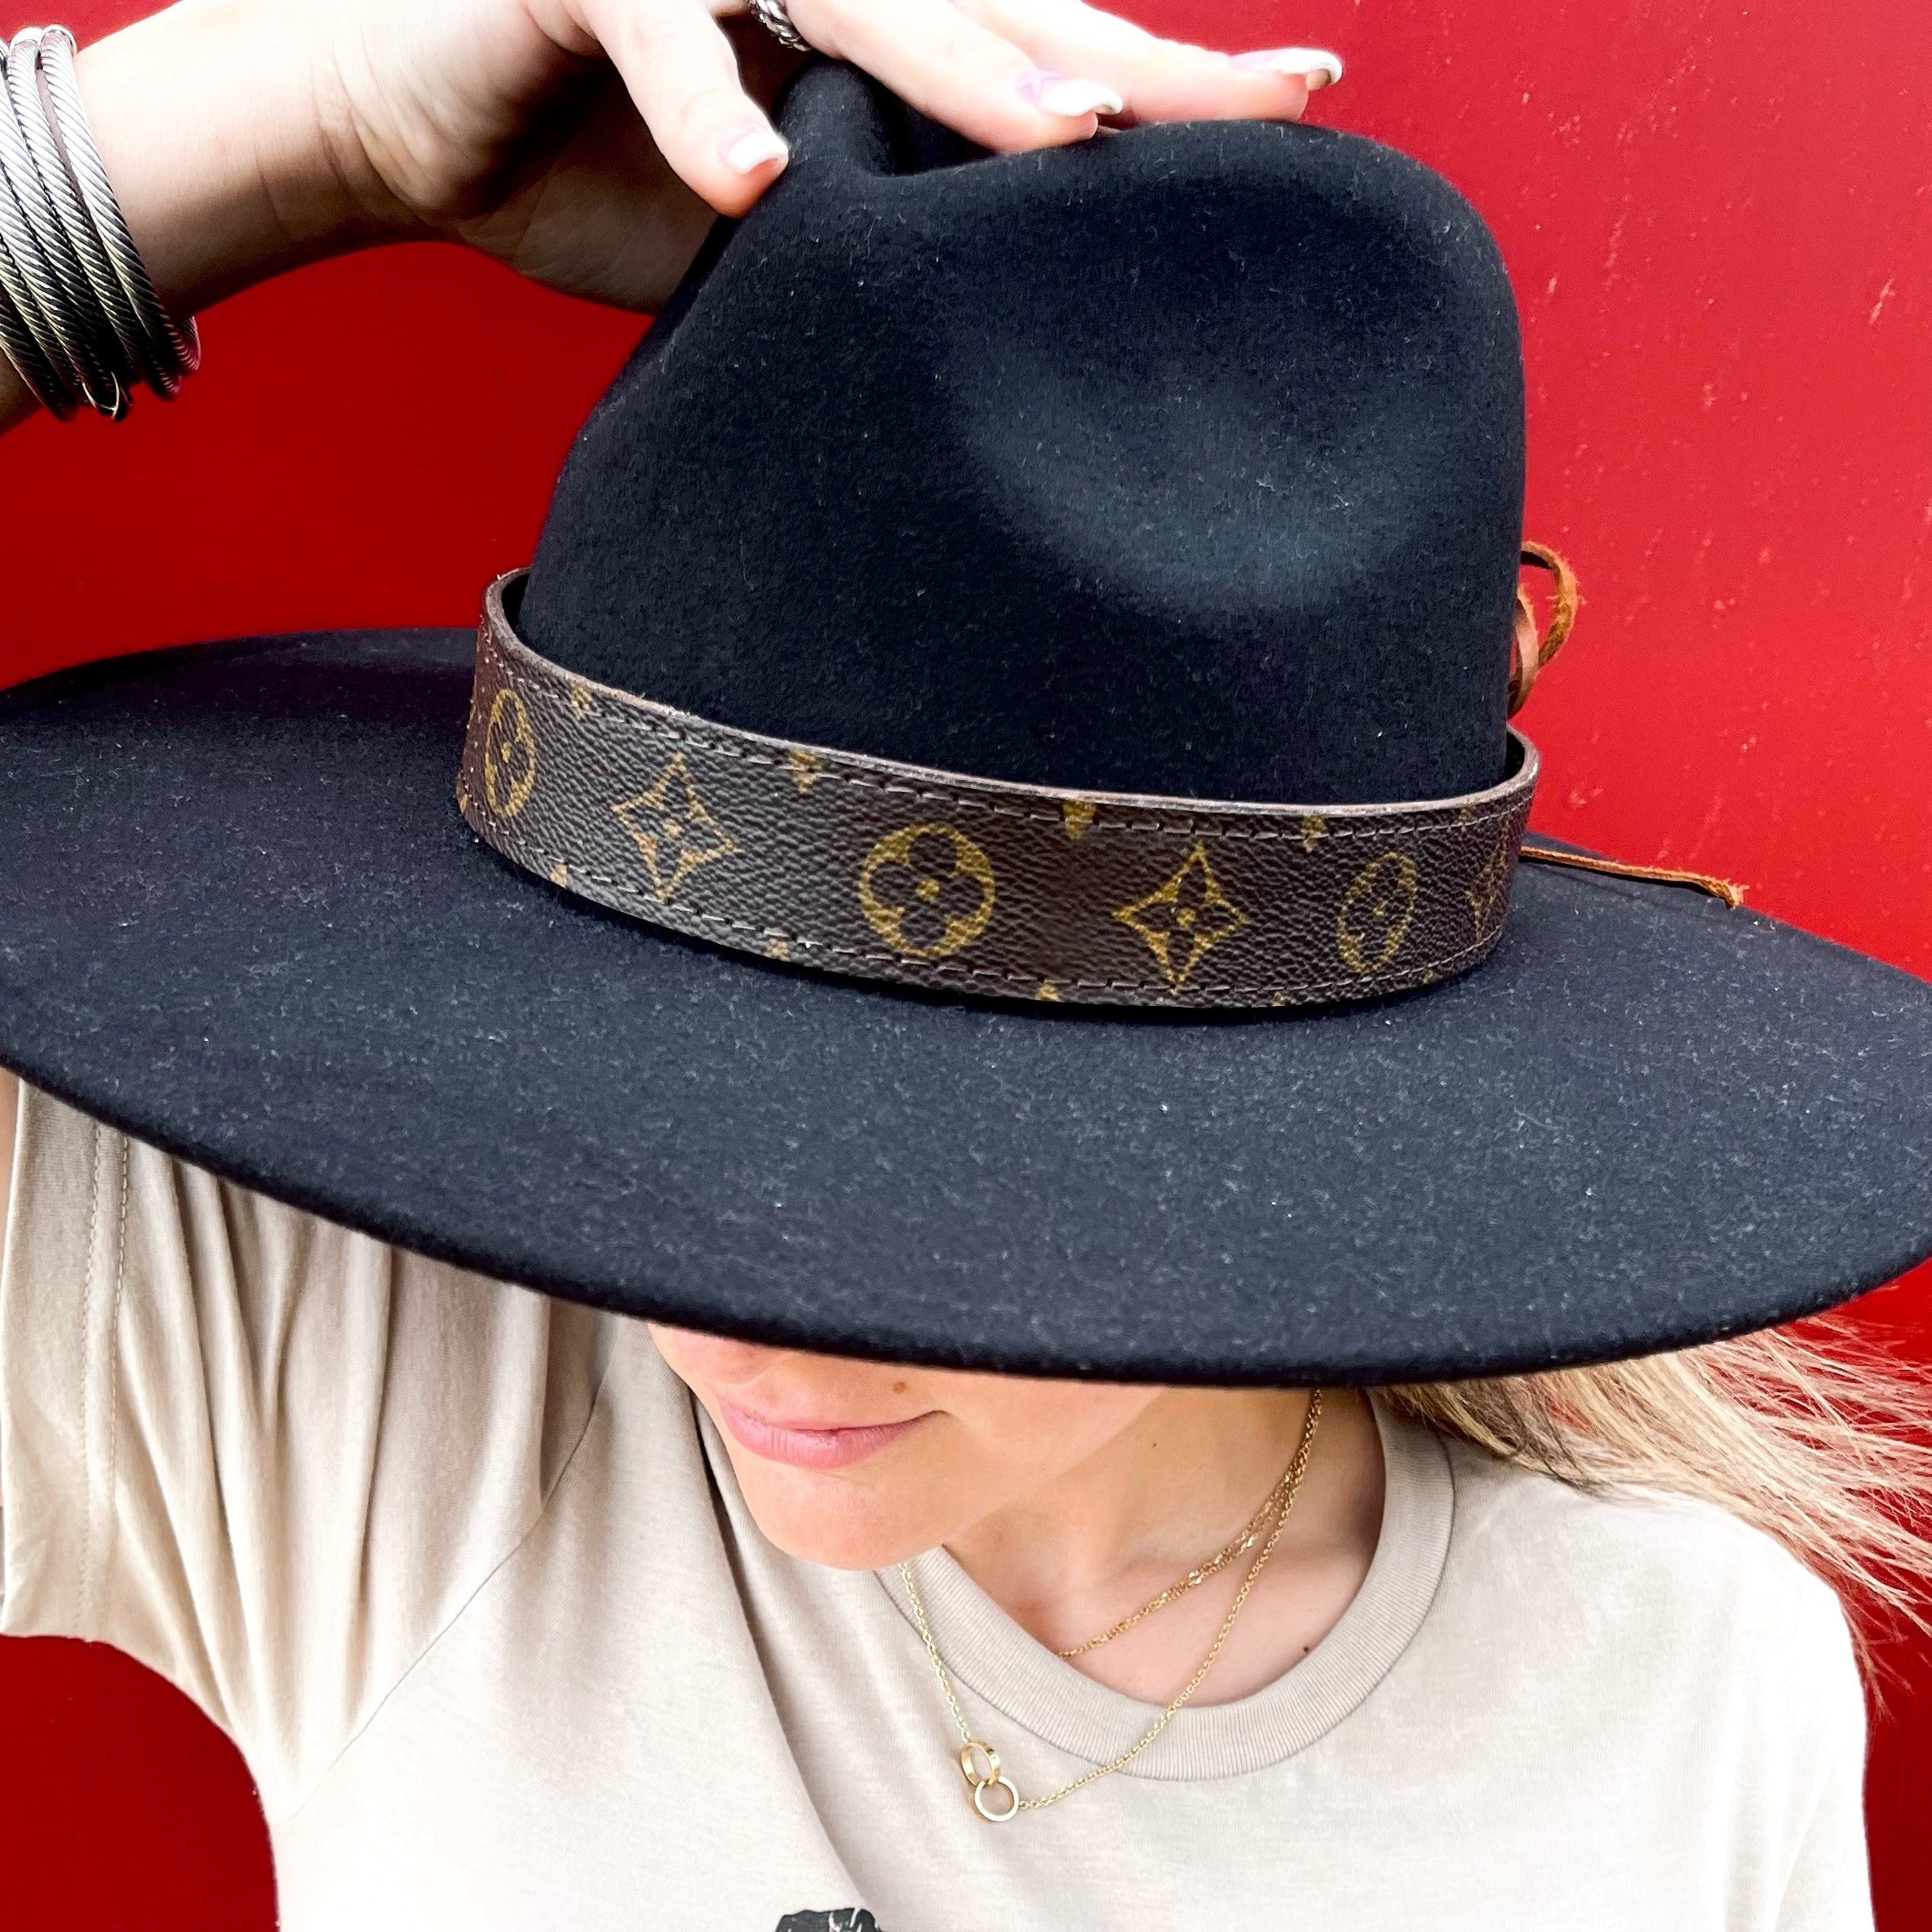 vuitton leather hat